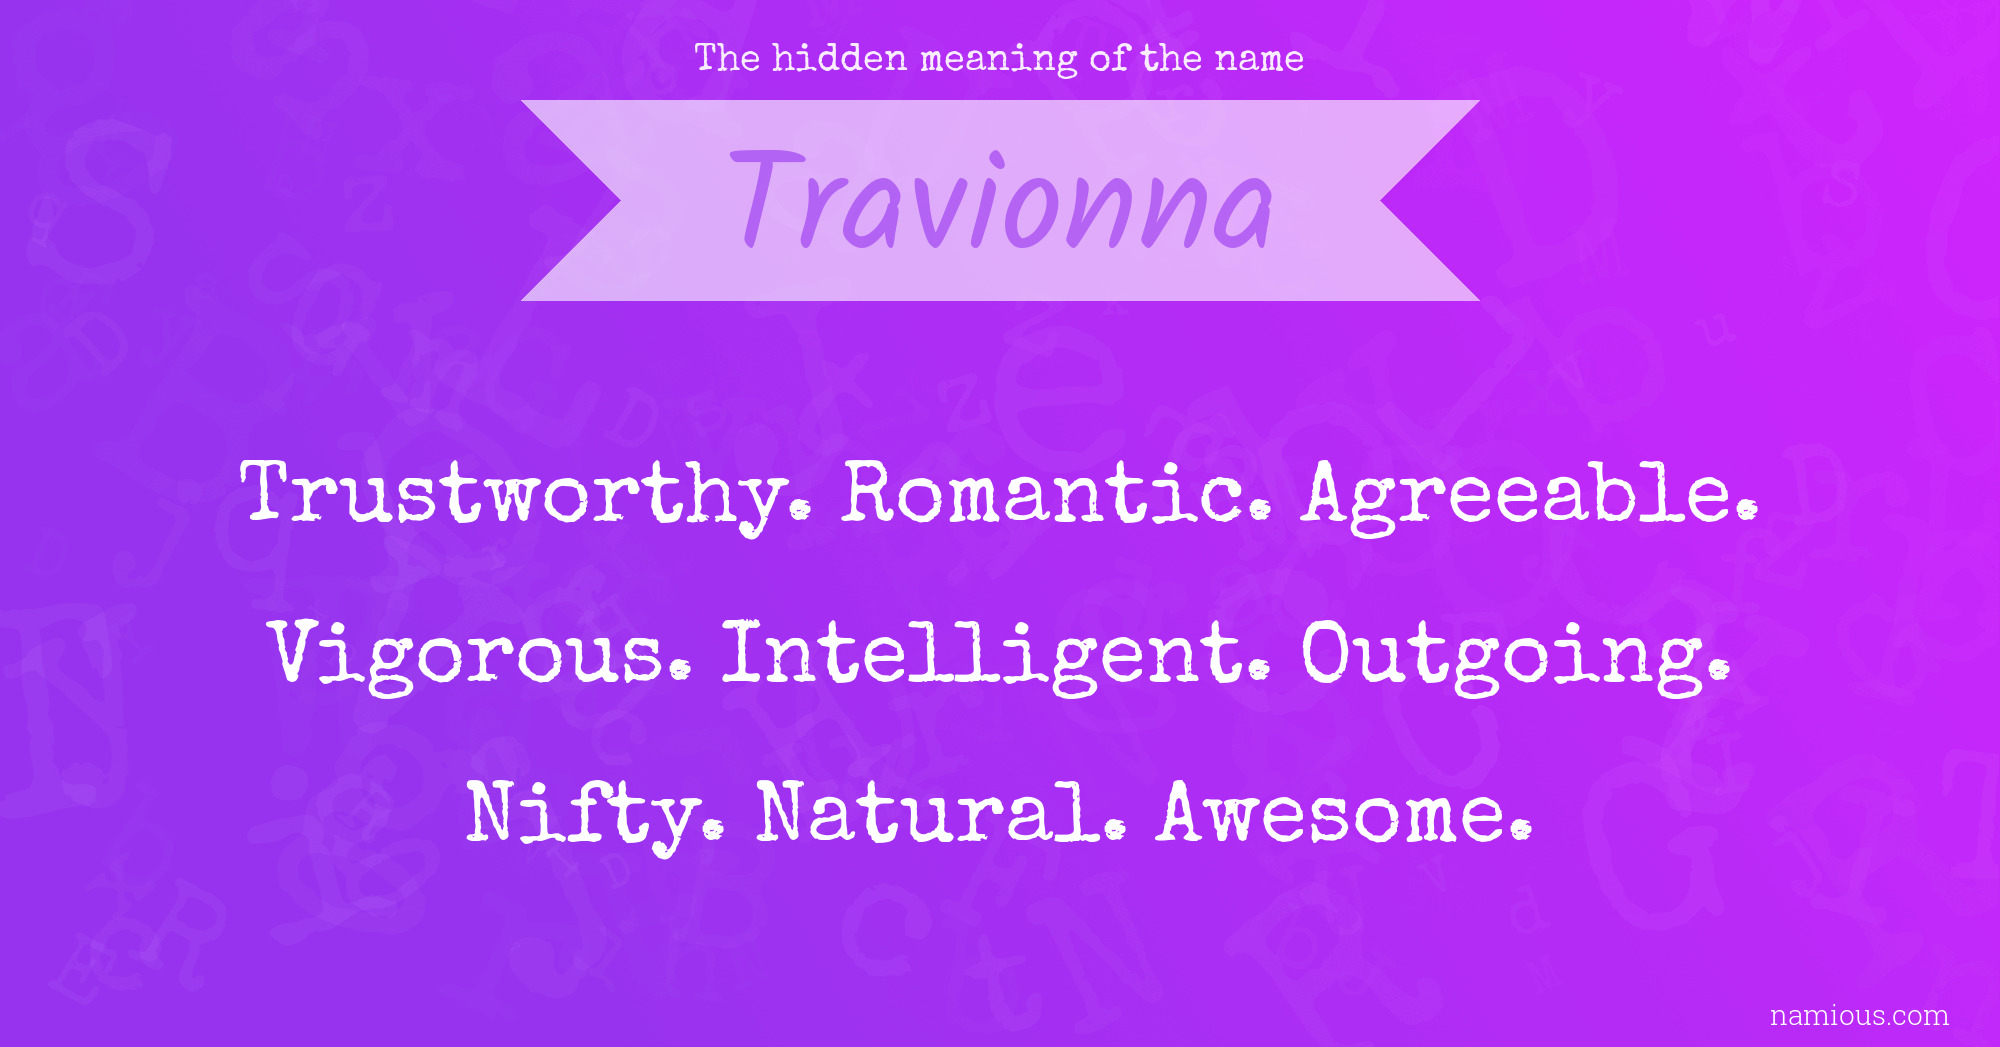 The hidden meaning of the name Travionna